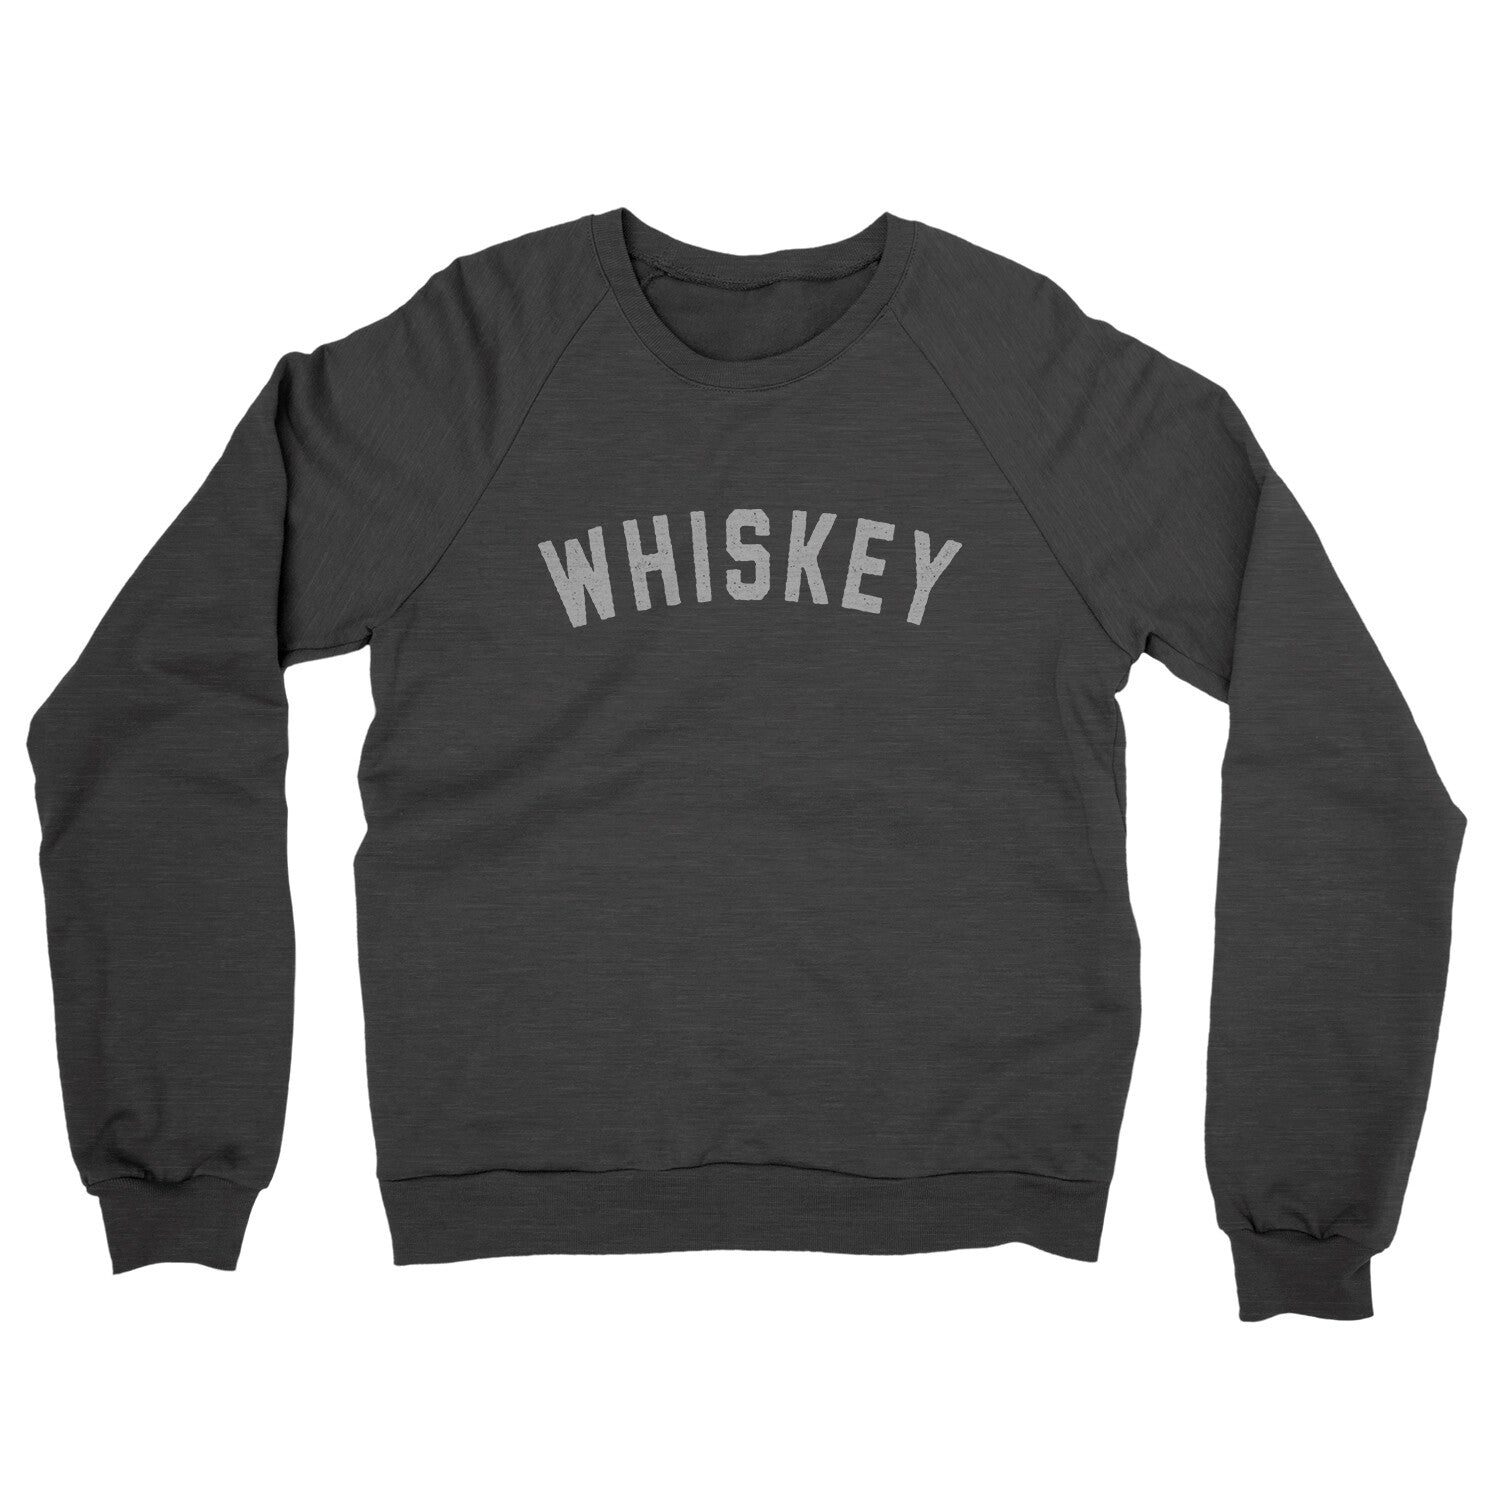 Whiskey in Charcoal Heather Color